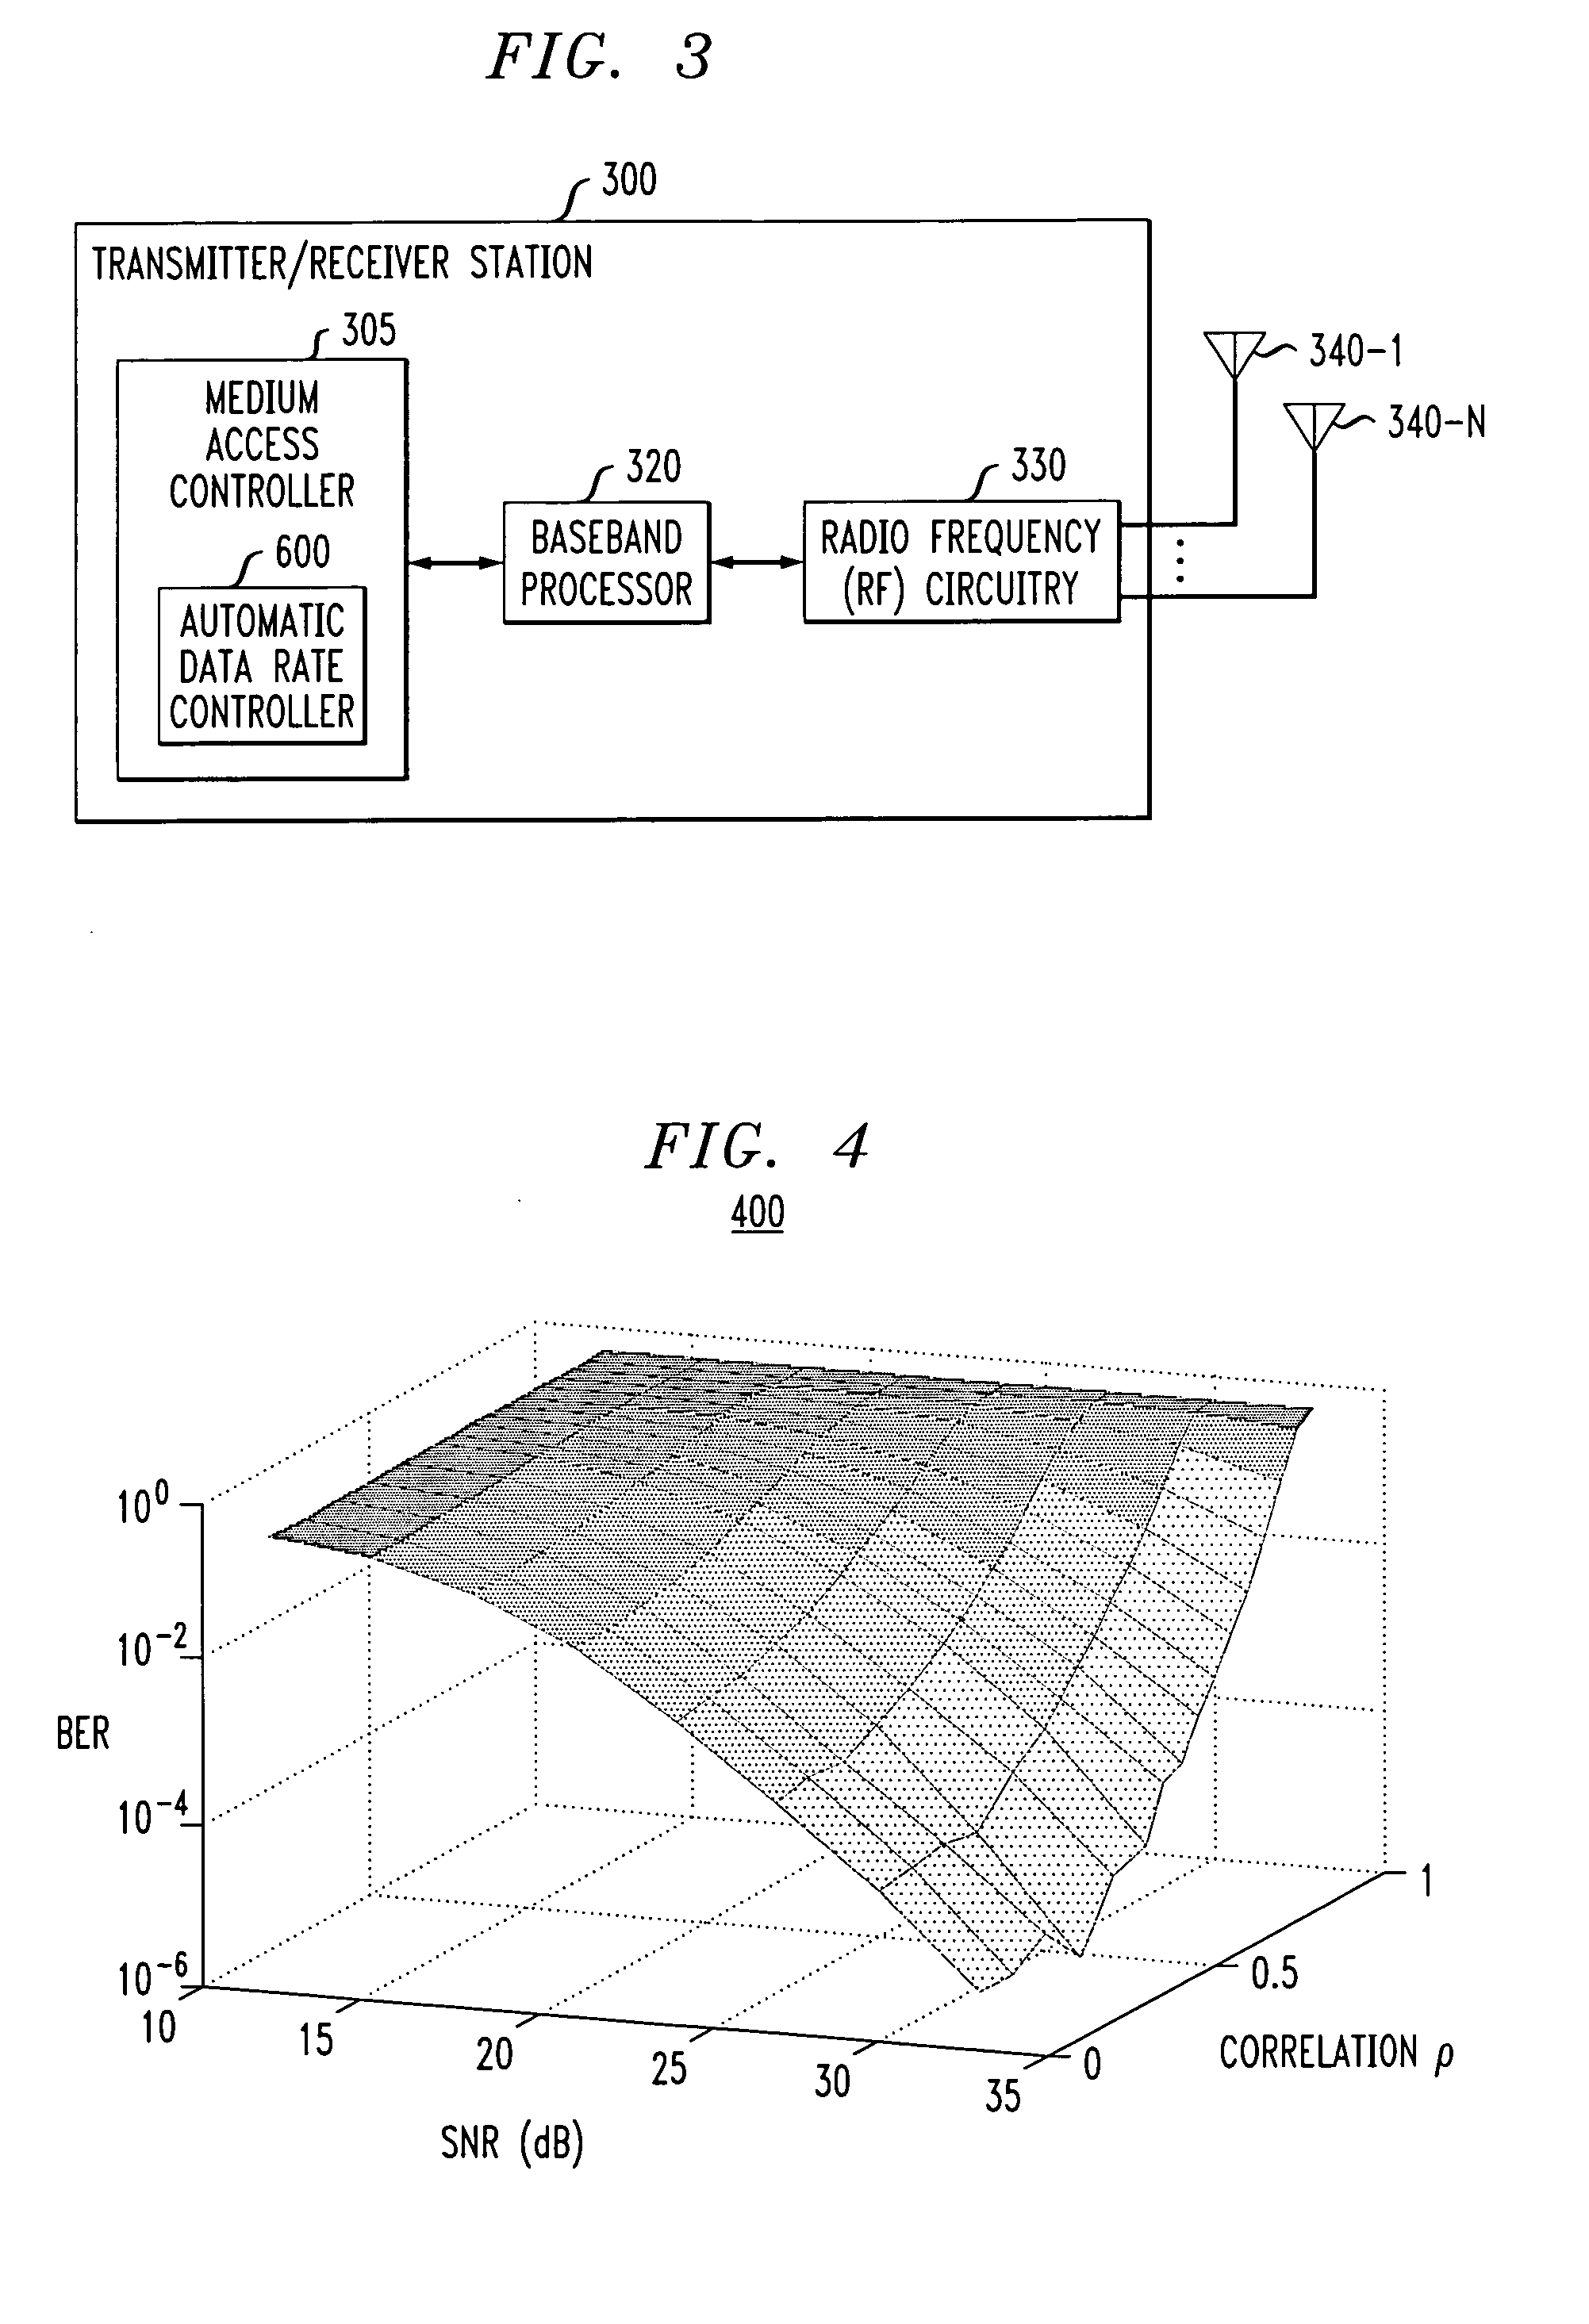 Method and apparatus for automatic data rate control using channel correlation in a wireless communication system